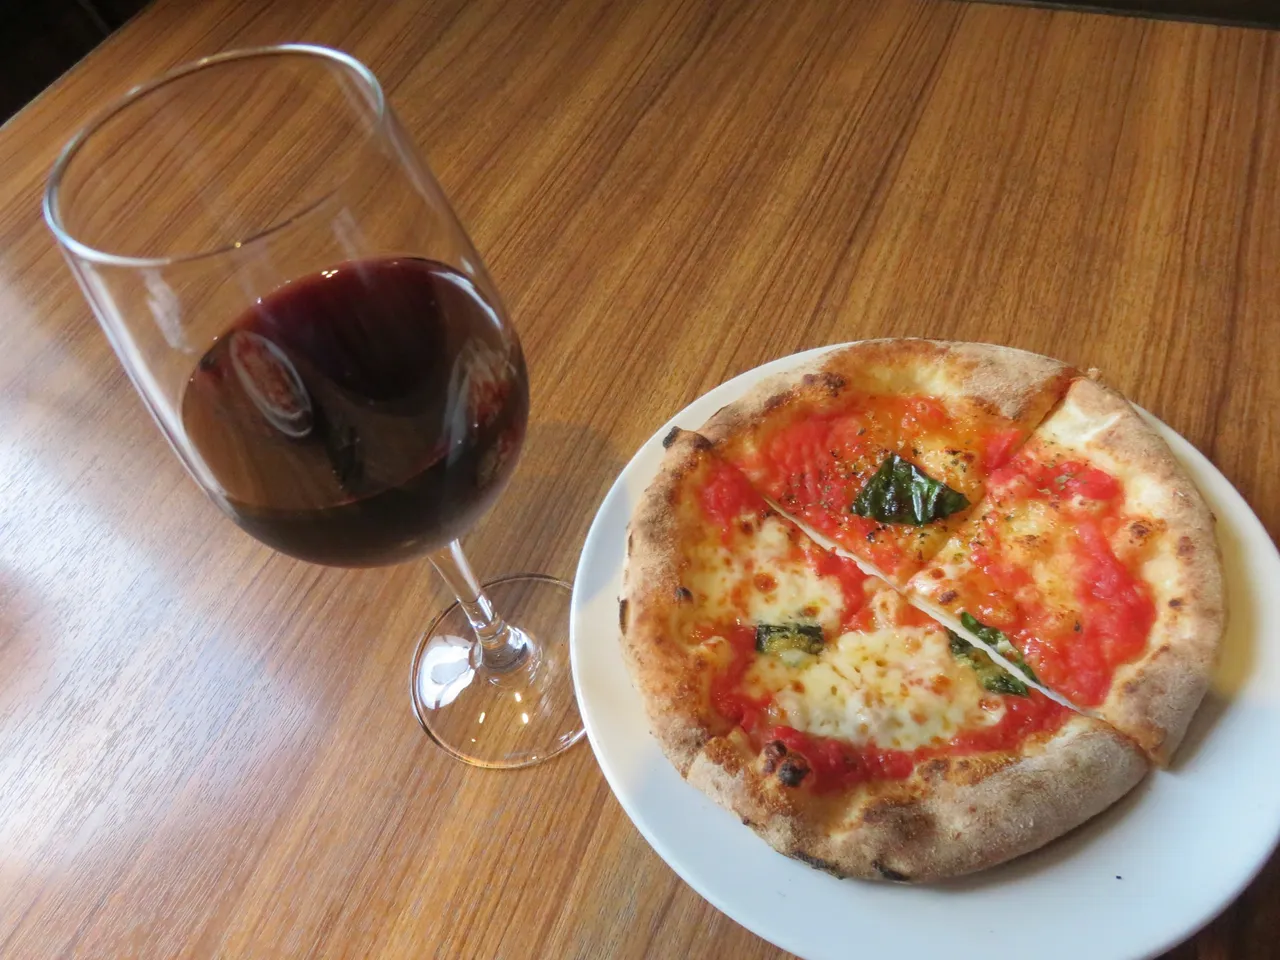 A fantastic pizza with another glass of wine.